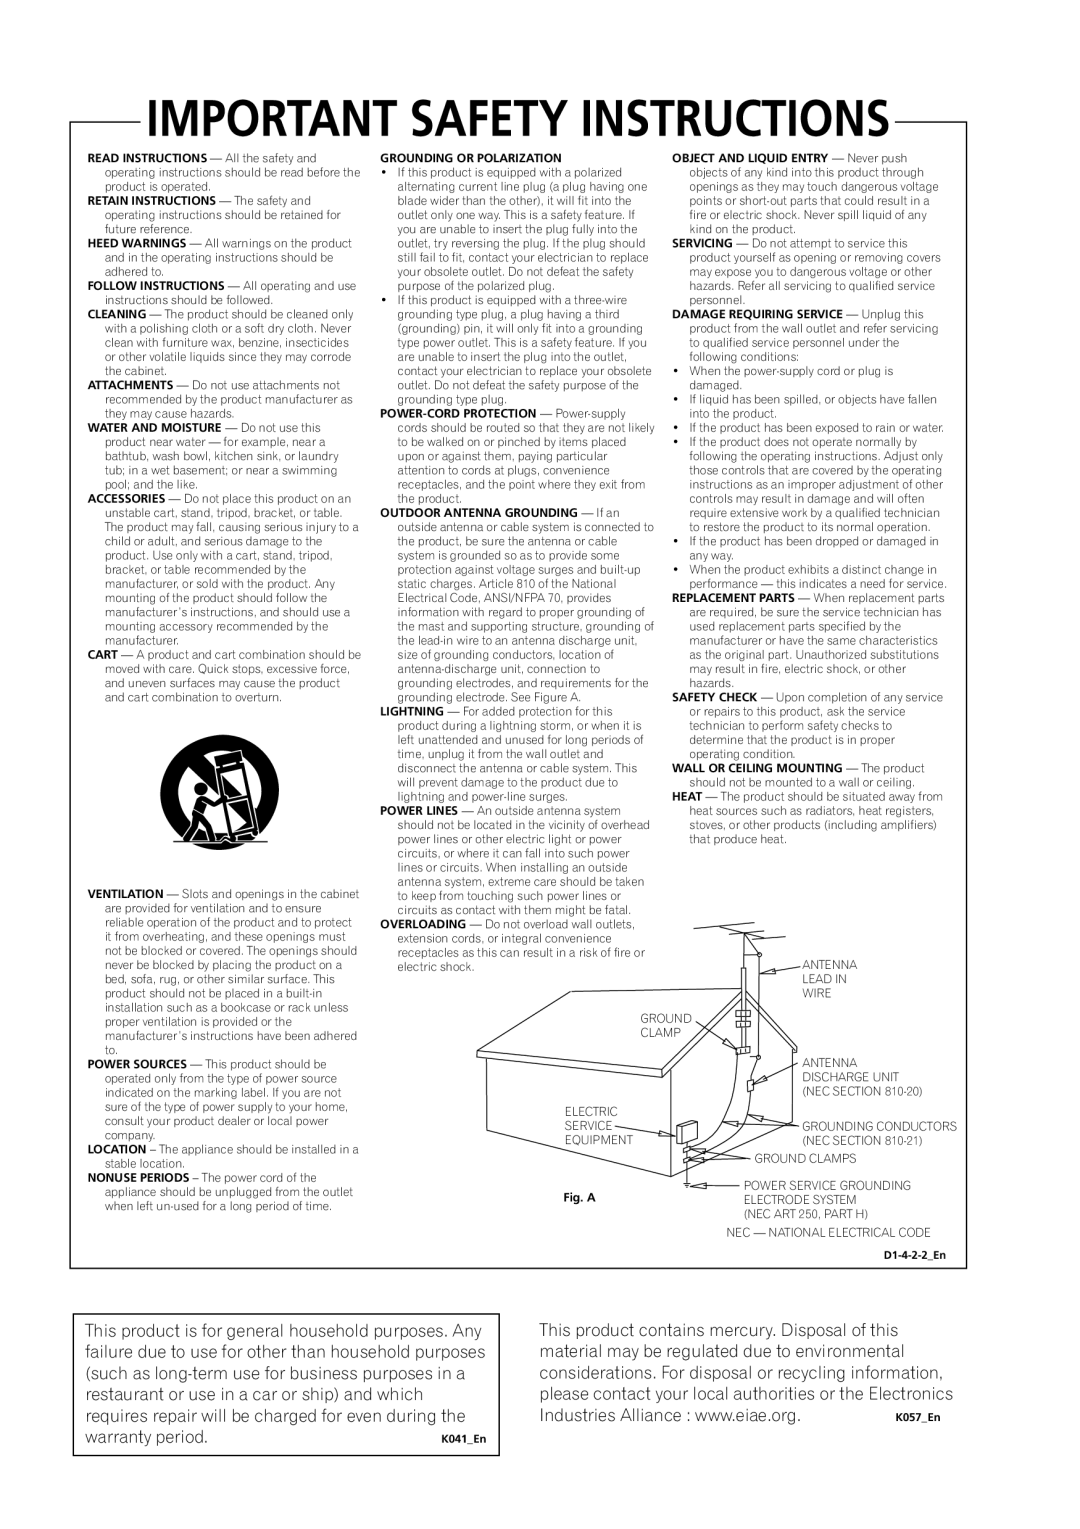 Pioneer SX-SW260, HTS-260 operating instructions Grounding Conductors 